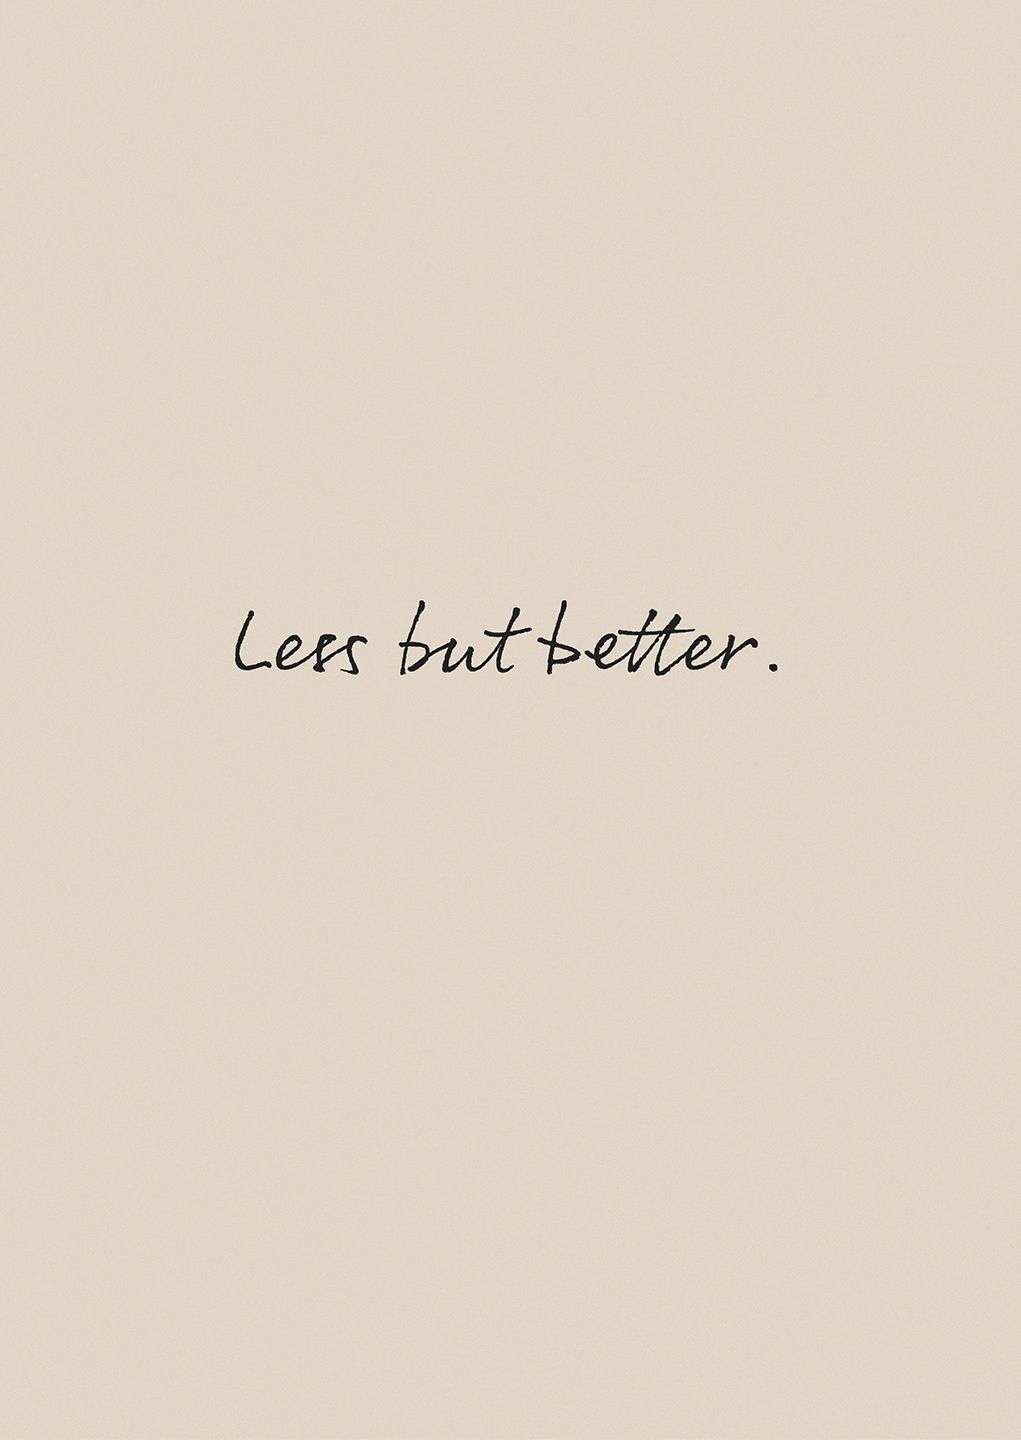 Free download Less But Better Poster Beige background Aesthetic pastel [1021x1440] for your Desktop, Mobile & Tablet. Explore Beige Background. Beige Wallpaper, Beige Striped Wallpaper, Beige Geometric Wallpaper